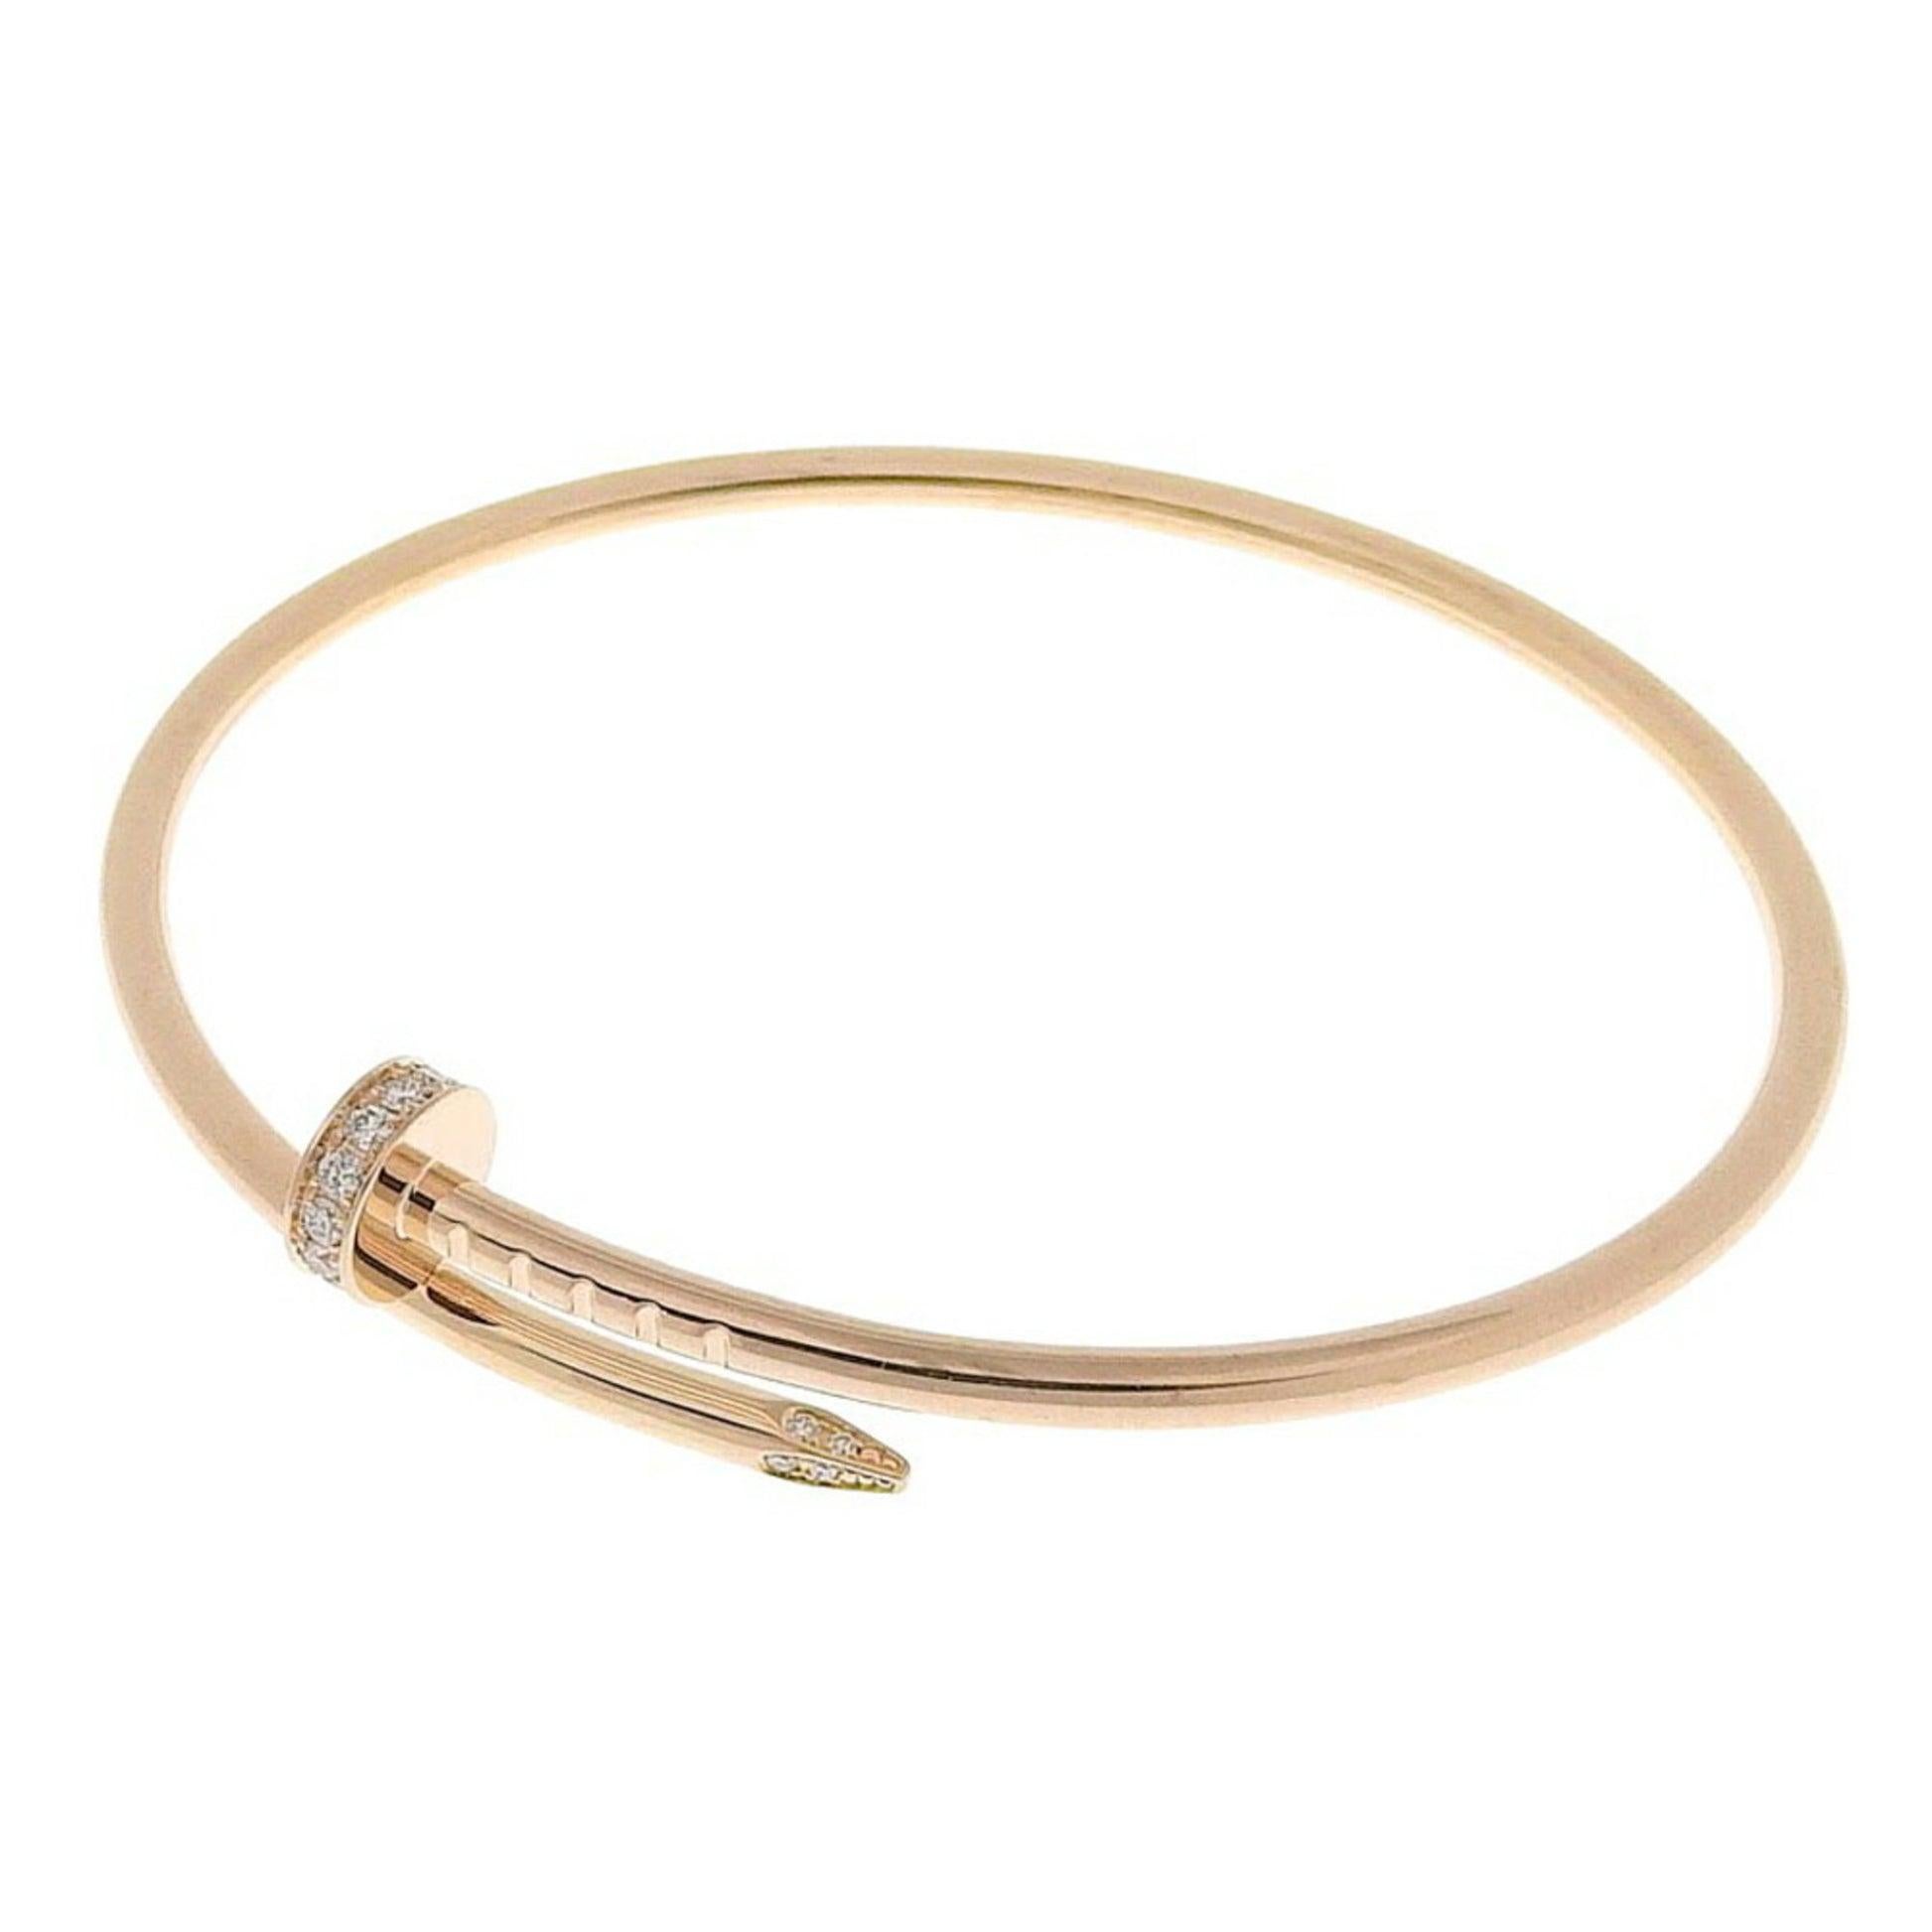 Cartier Just Uncle Sm Diamond Bangle in 18K Pink Gold

Additional Information:
Brand: Cartier
Gender: Women
Color: Pink
Material: Pink gold (18K)
Condition details: This item has been used and may have some minor flaws. Before purchasing, please